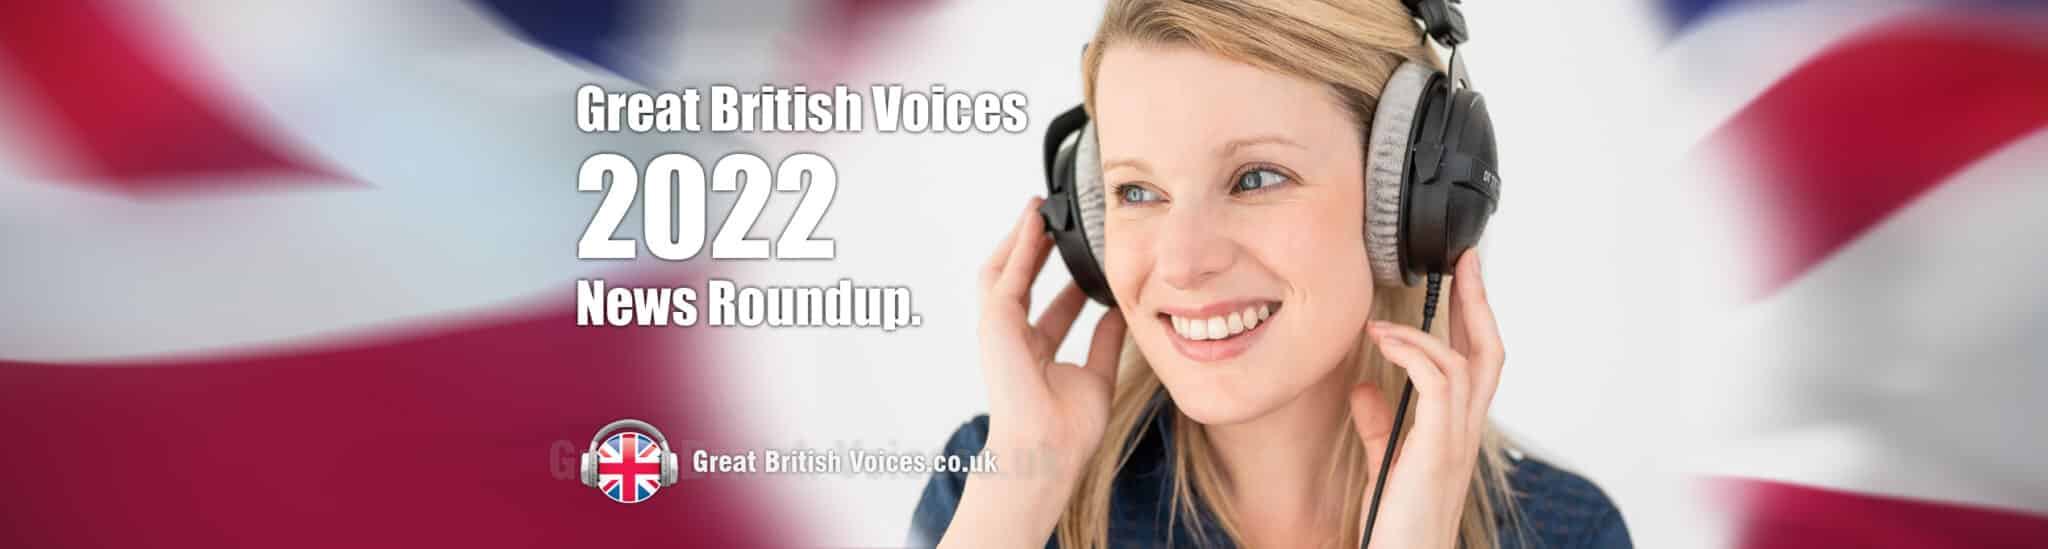 Great British Voices - Hire a professional voice over with Studio